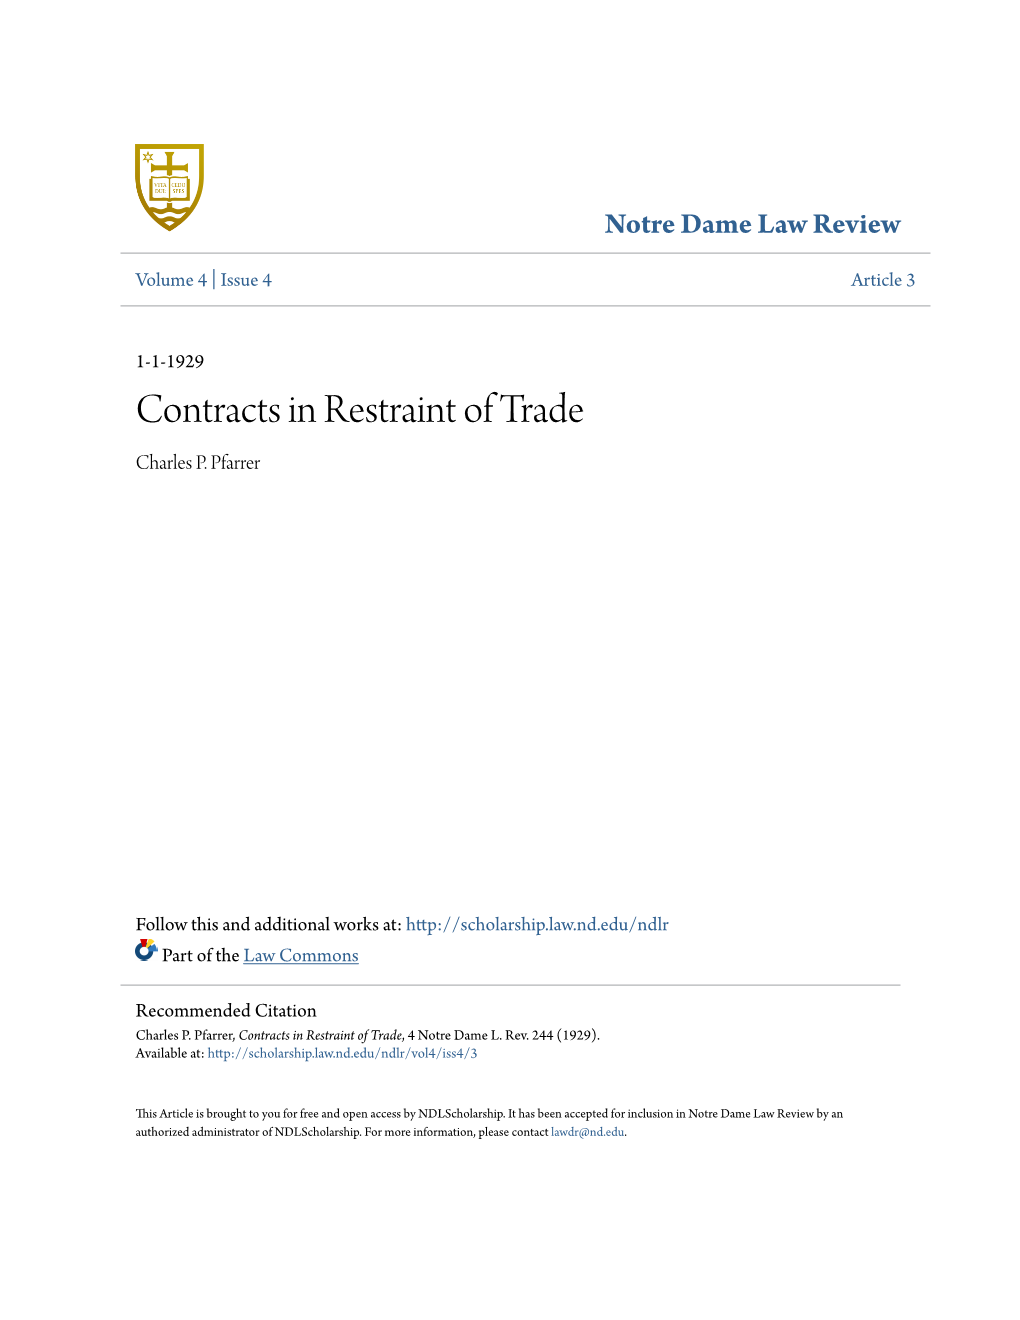 Contracts in Restraint of Trade Charles P